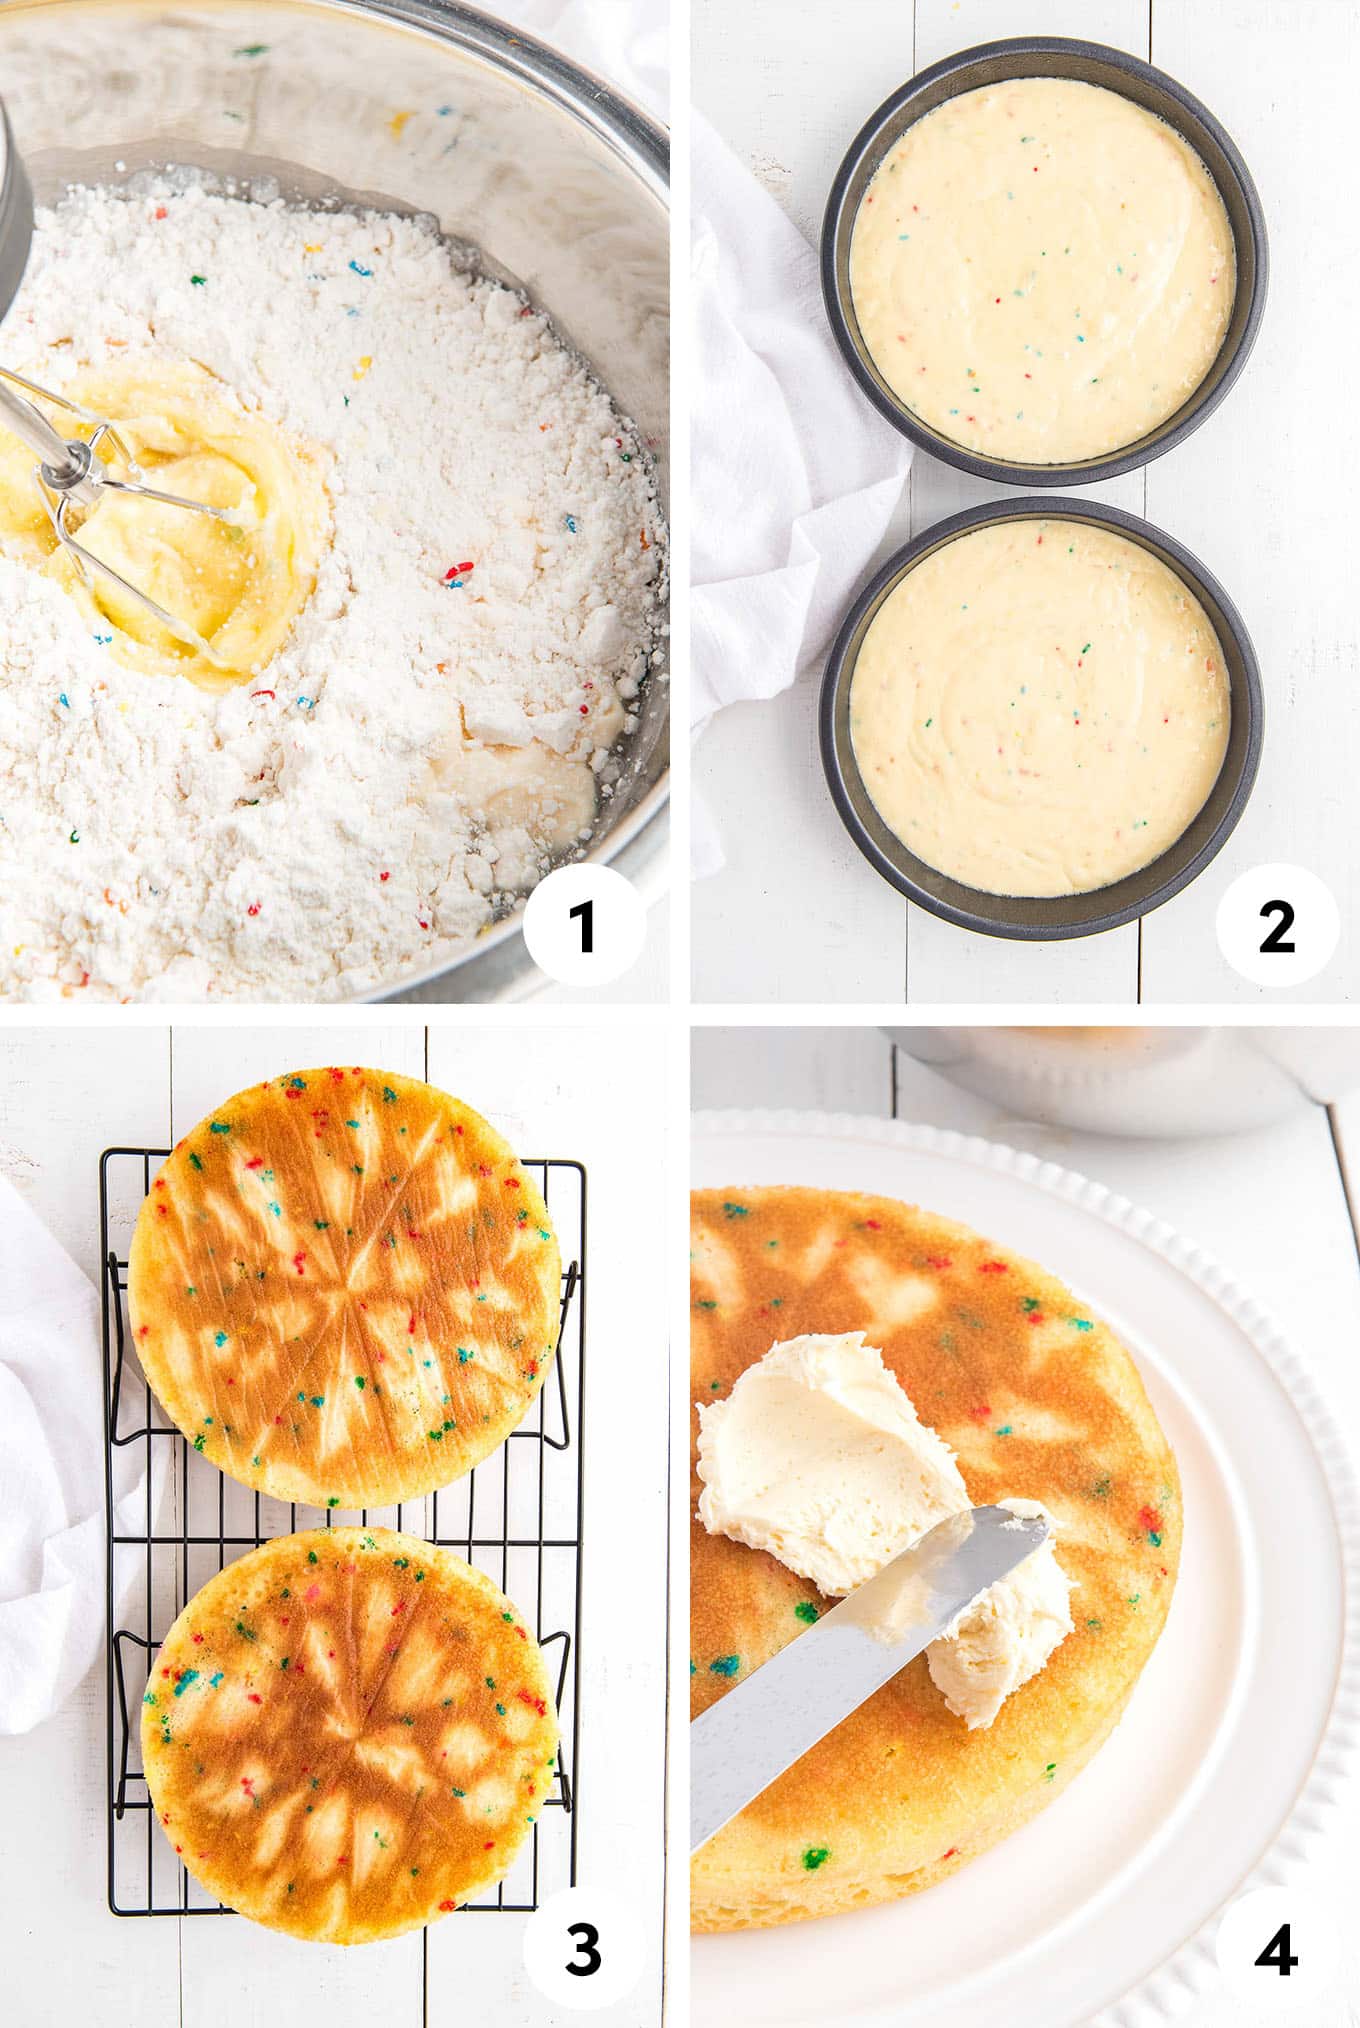 Collage of images showing mixing the funfetti cake mix, batter in the pans, cakes cooling, and adding the frosting.